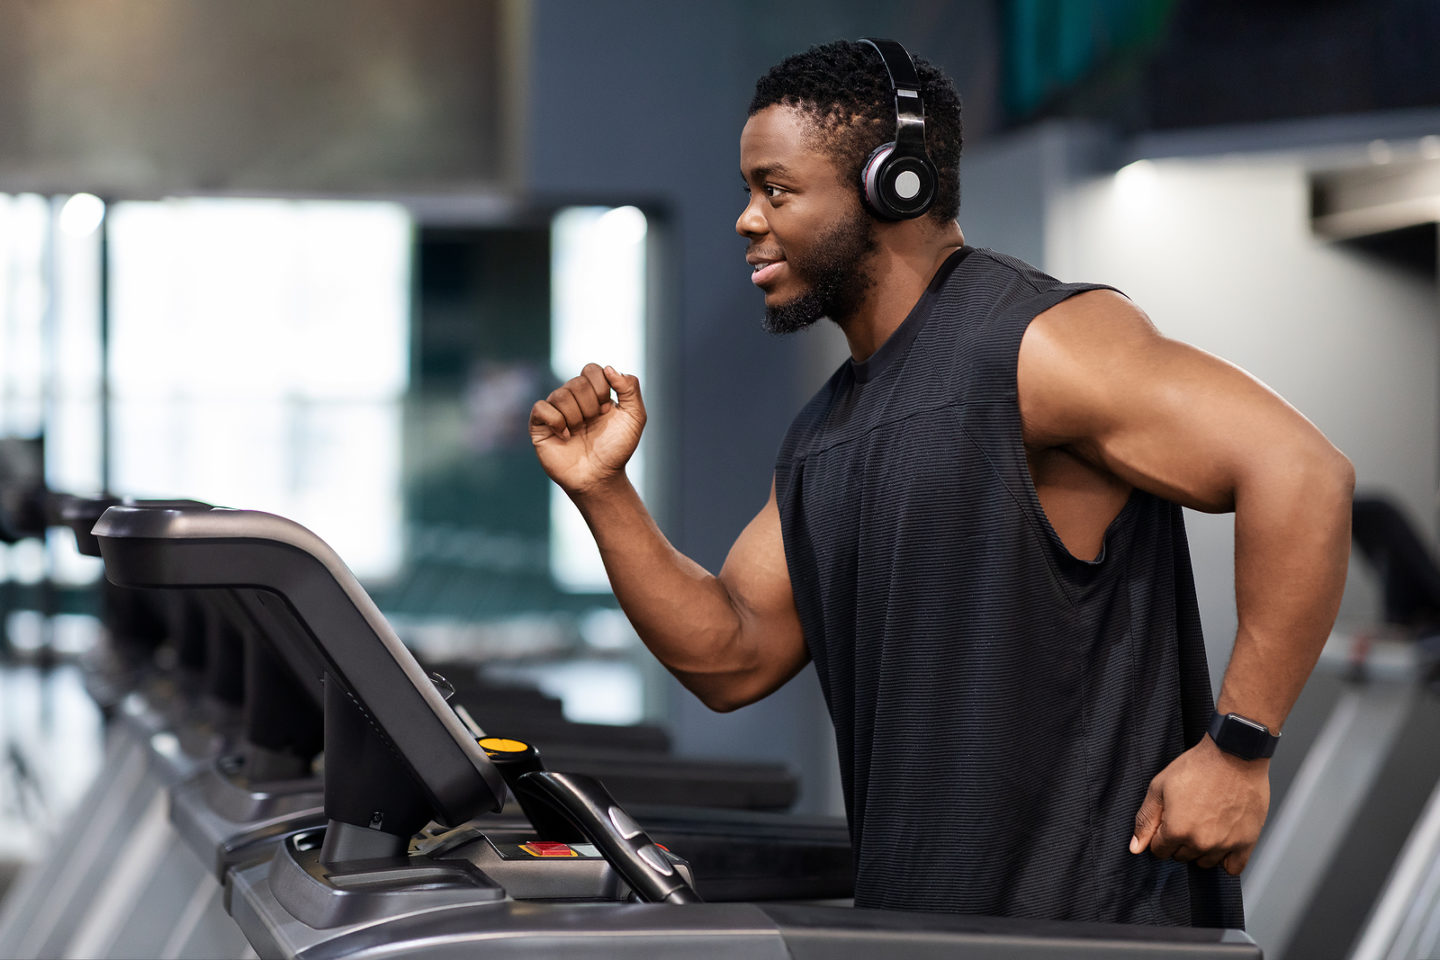 Jogging workout. Joyful black man in modern wireless headphones running on treadmill at gym, looking at free space. Motivated african american guy in black sportswear spending time at gym, jogging